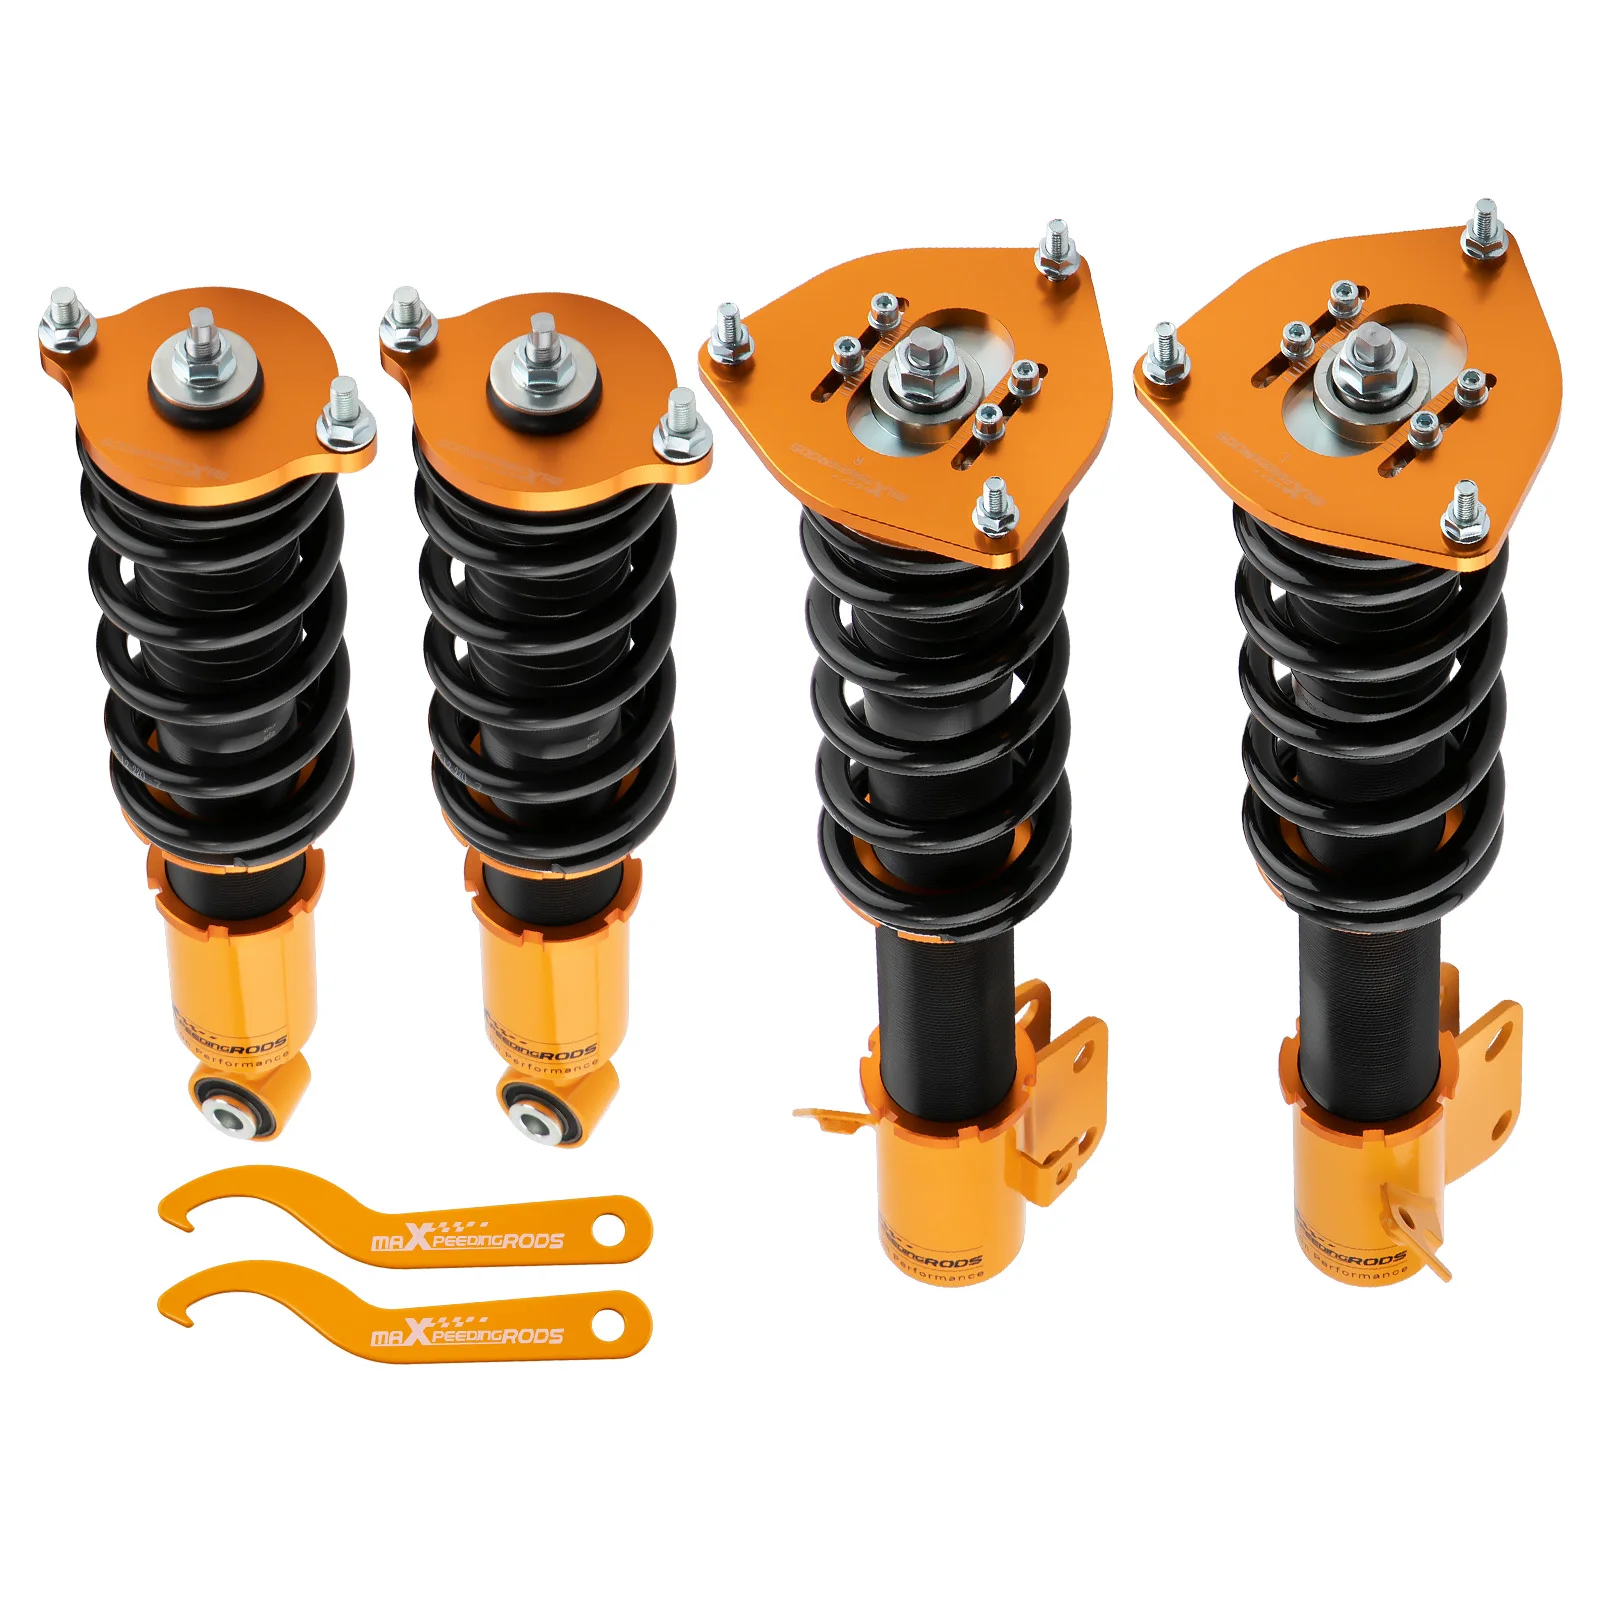 

Maxpeedingrods Performance Shocks Coil Spring Coilovers for Subaru Outback 1998-2003 Suspension kit